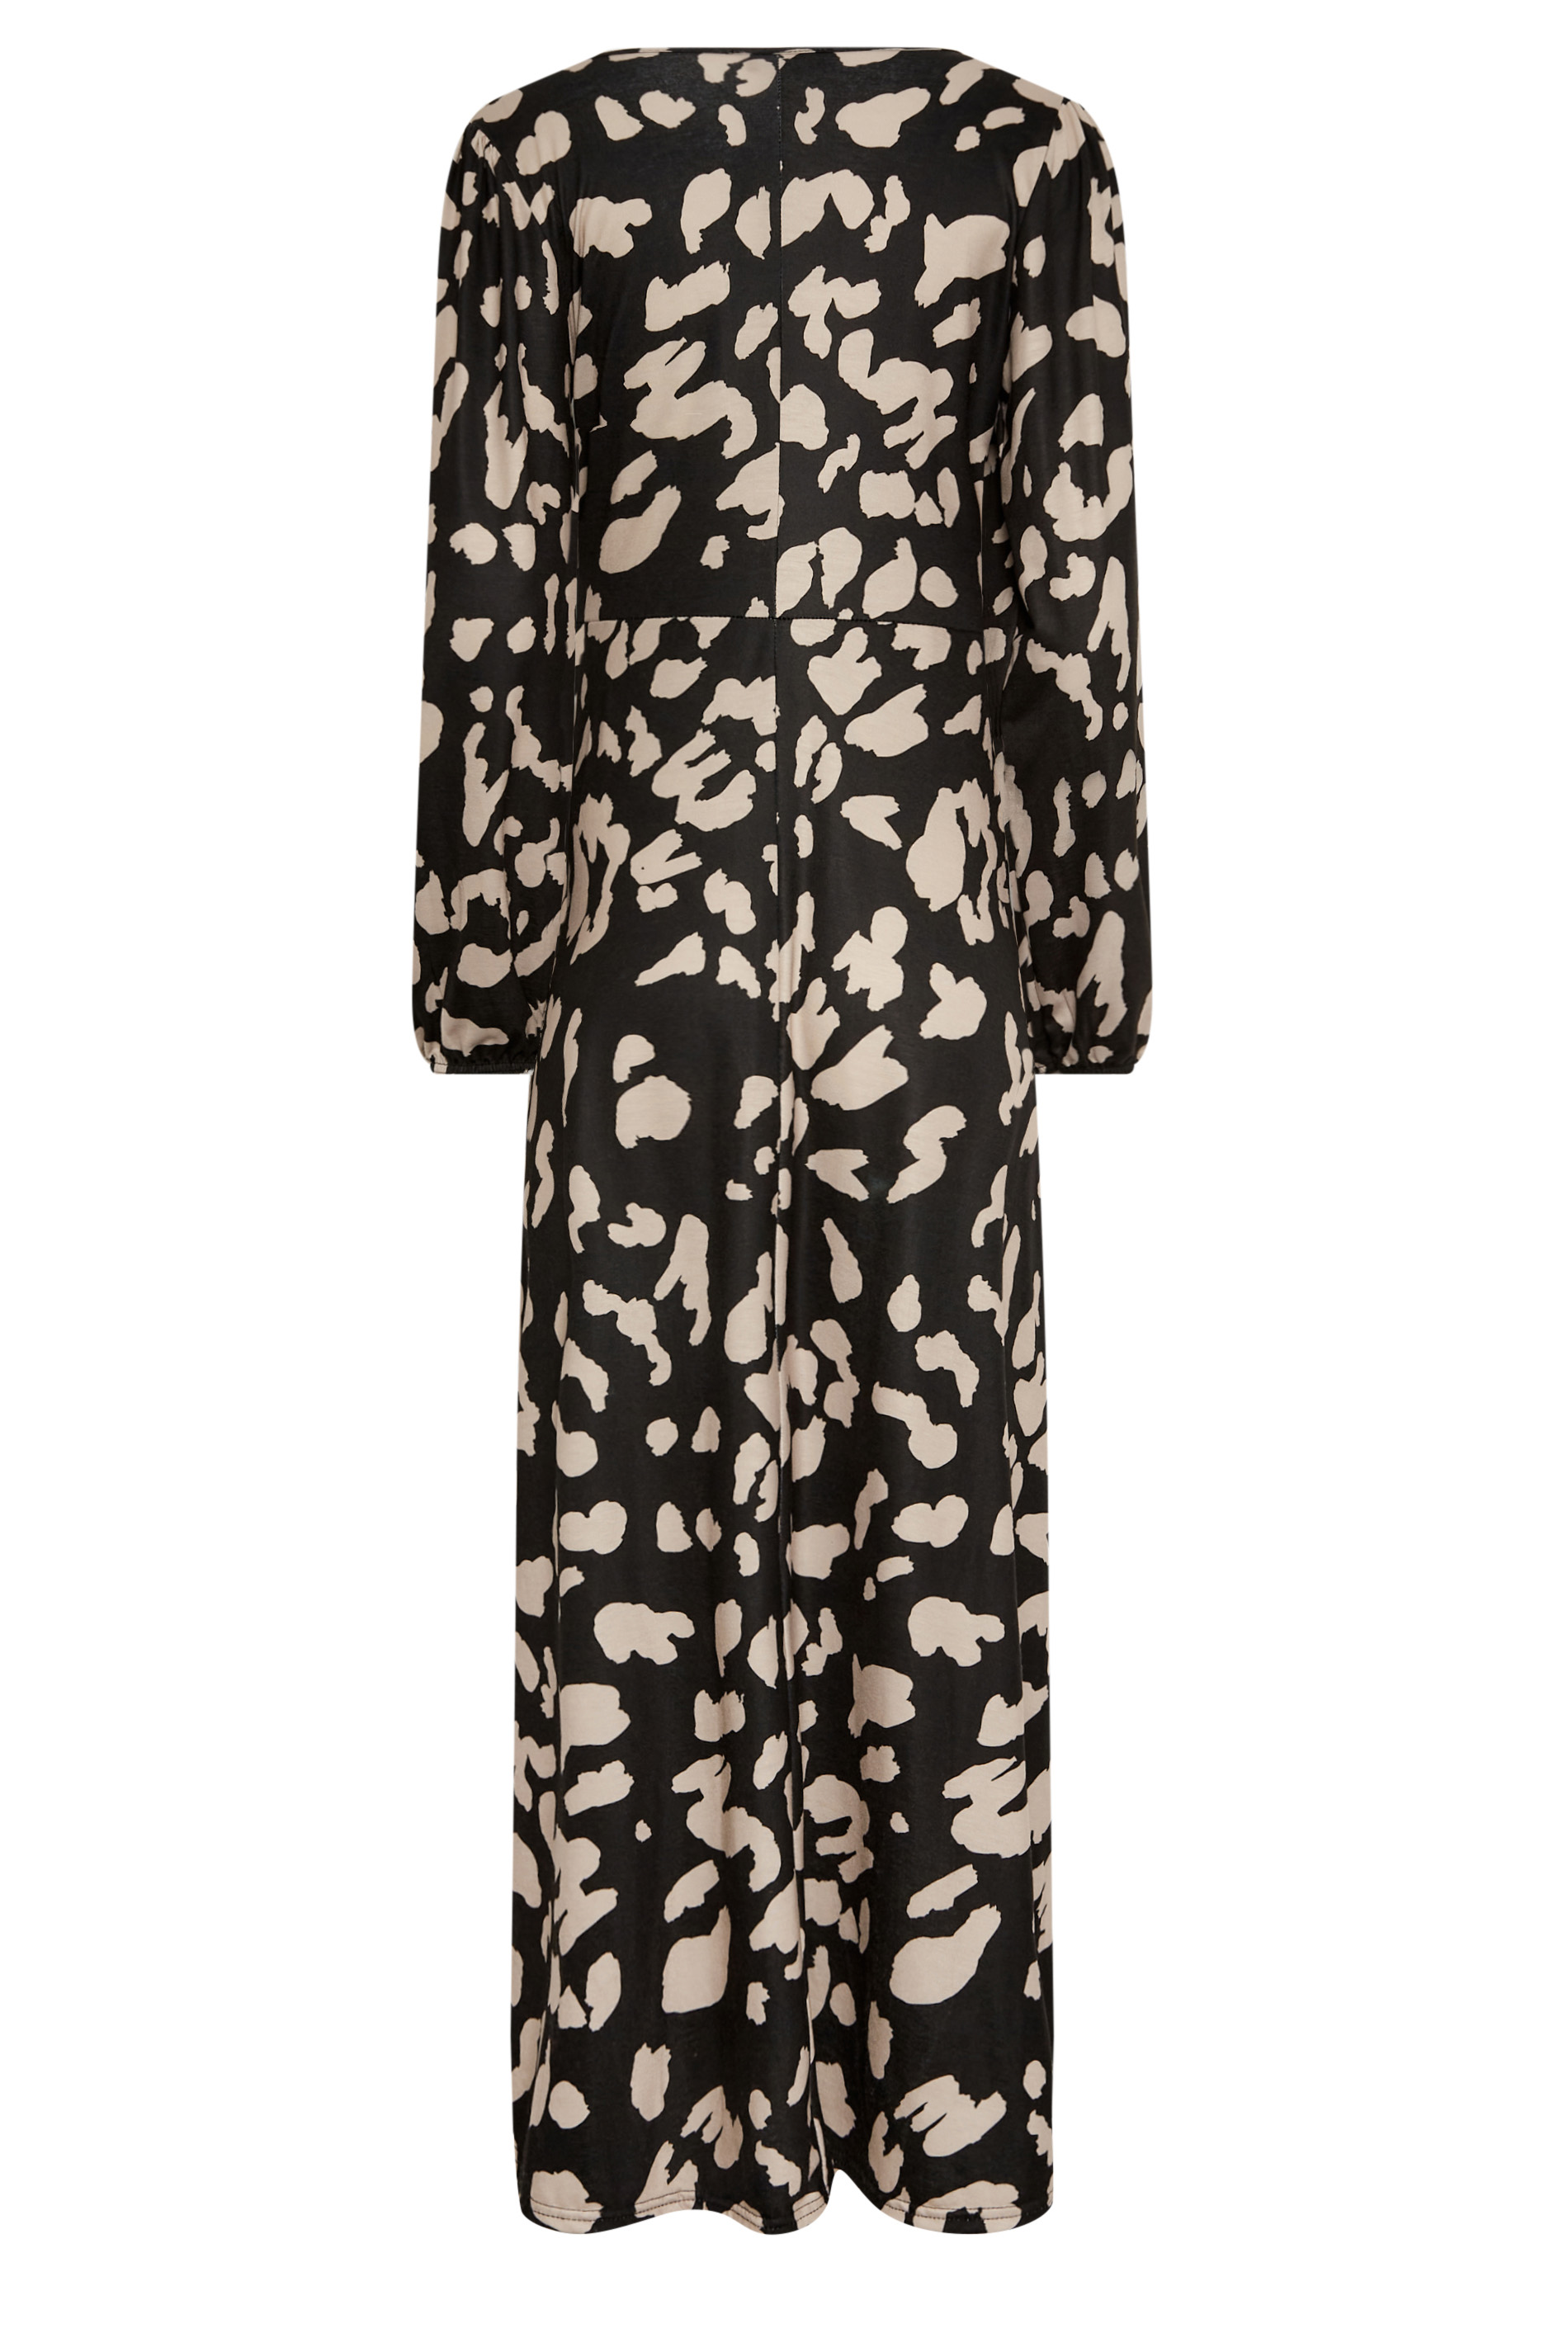 Long Tall Sally (LTS) Black & White Floral Dress; Tag Says US 12